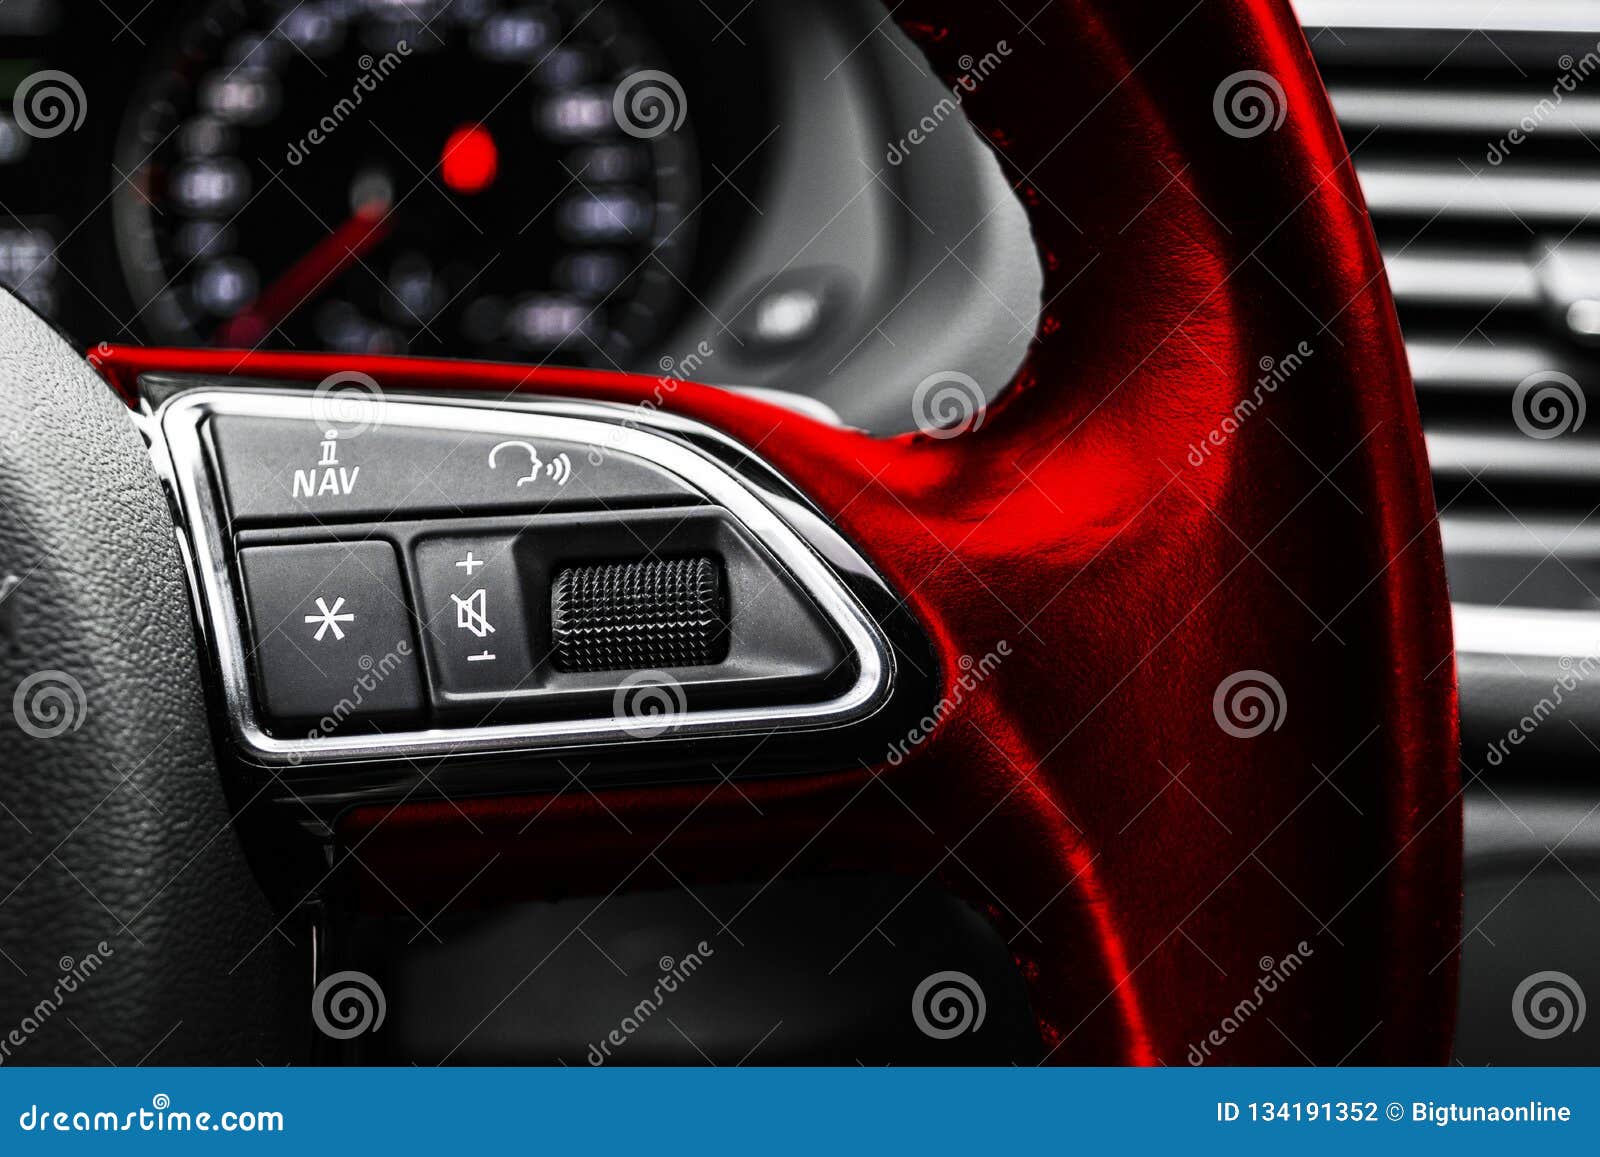 modern car interior. red steering wheel with media phone control buttons, navigation multimedia system background. car interior de